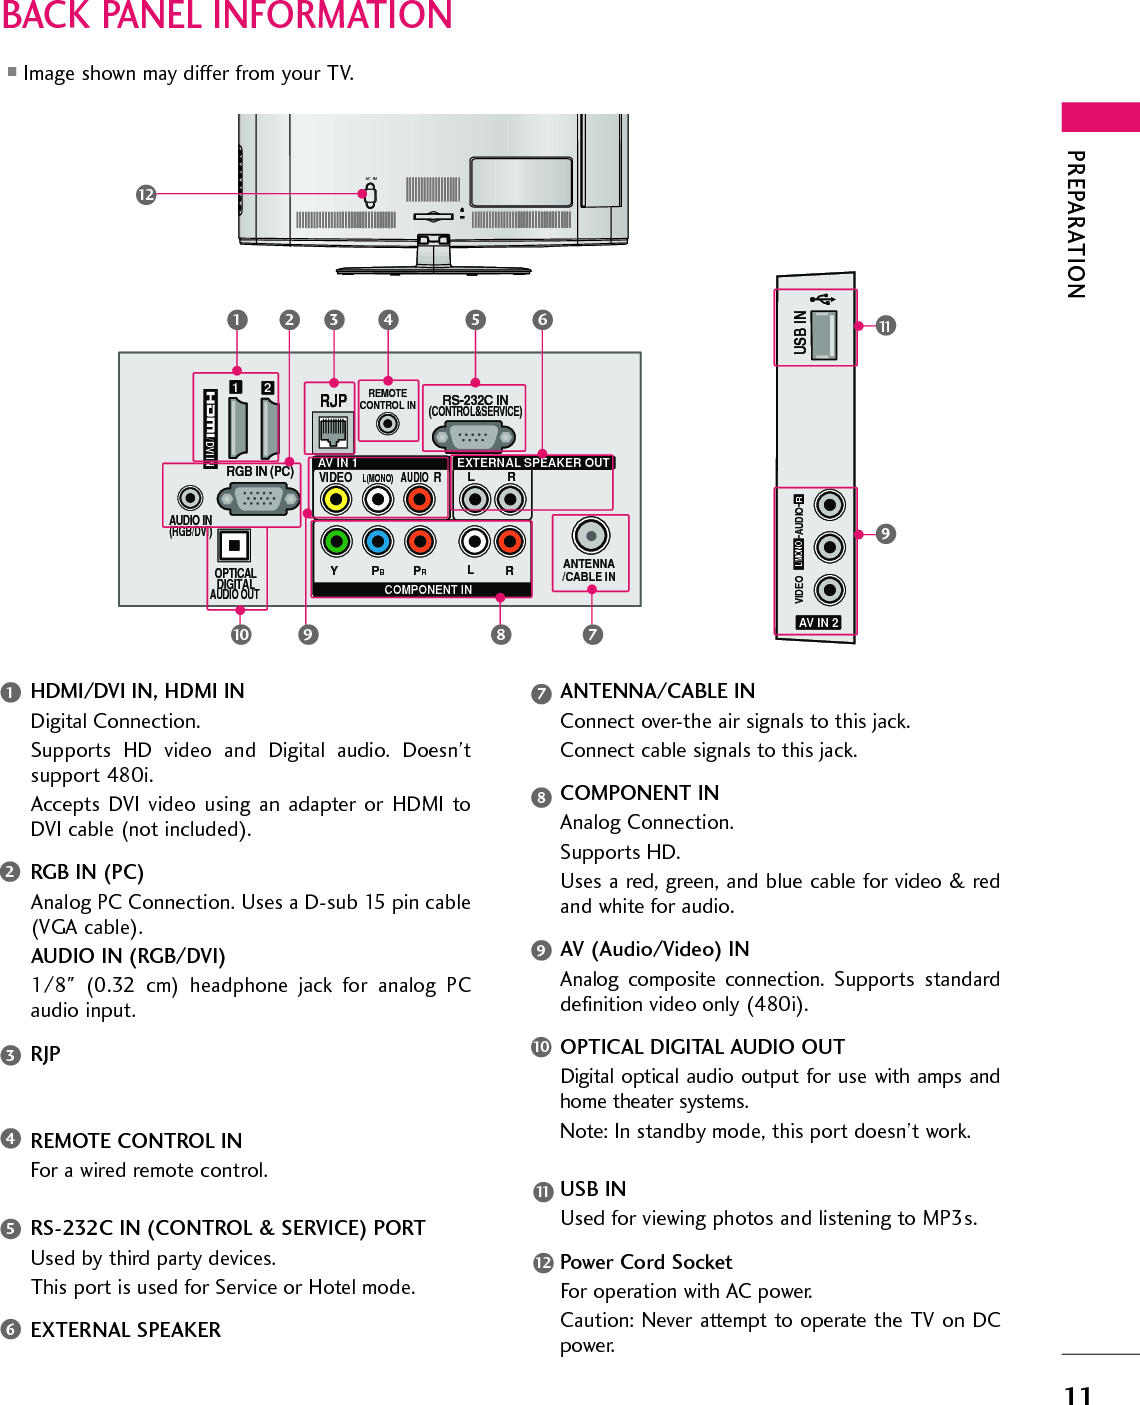 PREPARATION11BACK PANEL INFORMATION■Image shown may differ from your TV.AC  INVIDEOAUDIOL/MONORUSB INAV IN 21191RS-232C IN(CONTROL&amp;SERVICE)ANTENNA/CABLE INYPBPRLLRRRGB IN (PC)VIDEOAUDIORL(MONO)COMPONENT INOPTICALDIGITALAUDIO OUT AUDIO IN(RGB/DVI)/DVI IN2AV IN 1 EXTERNAL SPEAKER OUTRJP REMOTECONTROL IN1 5810 9 72 43 612HDMI/DVI IN, HDMI INDigital Connection. Supports  HD  video  and  Digital  audio.  Doesn’tsupport 480i. Accepts  DVI  video  using an  adapter  or  HDMI  toDVI cable (not included).RGB IN (PC)Analog PC Connection. Uses a D-sub 15 pin cable(VGA cable).AUDIO IN (RGB/DVI)1/8&quot;  (0.32  cm)  headphone  jack  for  analog  PCaudio input.RJPREMOTE CONTROL INFor a wired remote control.RS-232C IN (CONTROL &amp; SERVICE) PORTUsed by third party devices.This port is used for Service or Hotel mode.EXTERNAL SPEAKERANTENNA/CABLE INConnect over-the air signals to this jack.Connect cable signals to this jack.COMPONENT INAnalog Connection. Supports HD. Uses a red, green, and blue cable for video &amp; redand white for audio.AV (Audio/Video) INAnalog  composite  connection. Supports  standarddefinition video only (480i).OPTICAL DIGITAL AUDIO OUTDigital optical audio  output for use  with amps andhome theater systems. Note: In standby mode, this port doesn’t work.USB INUsed for viewing photos and listening to MP3s.Power Cord SocketFor operation with AC power. Caution: Never attempt to operate the TV on DCpower.123456987101112